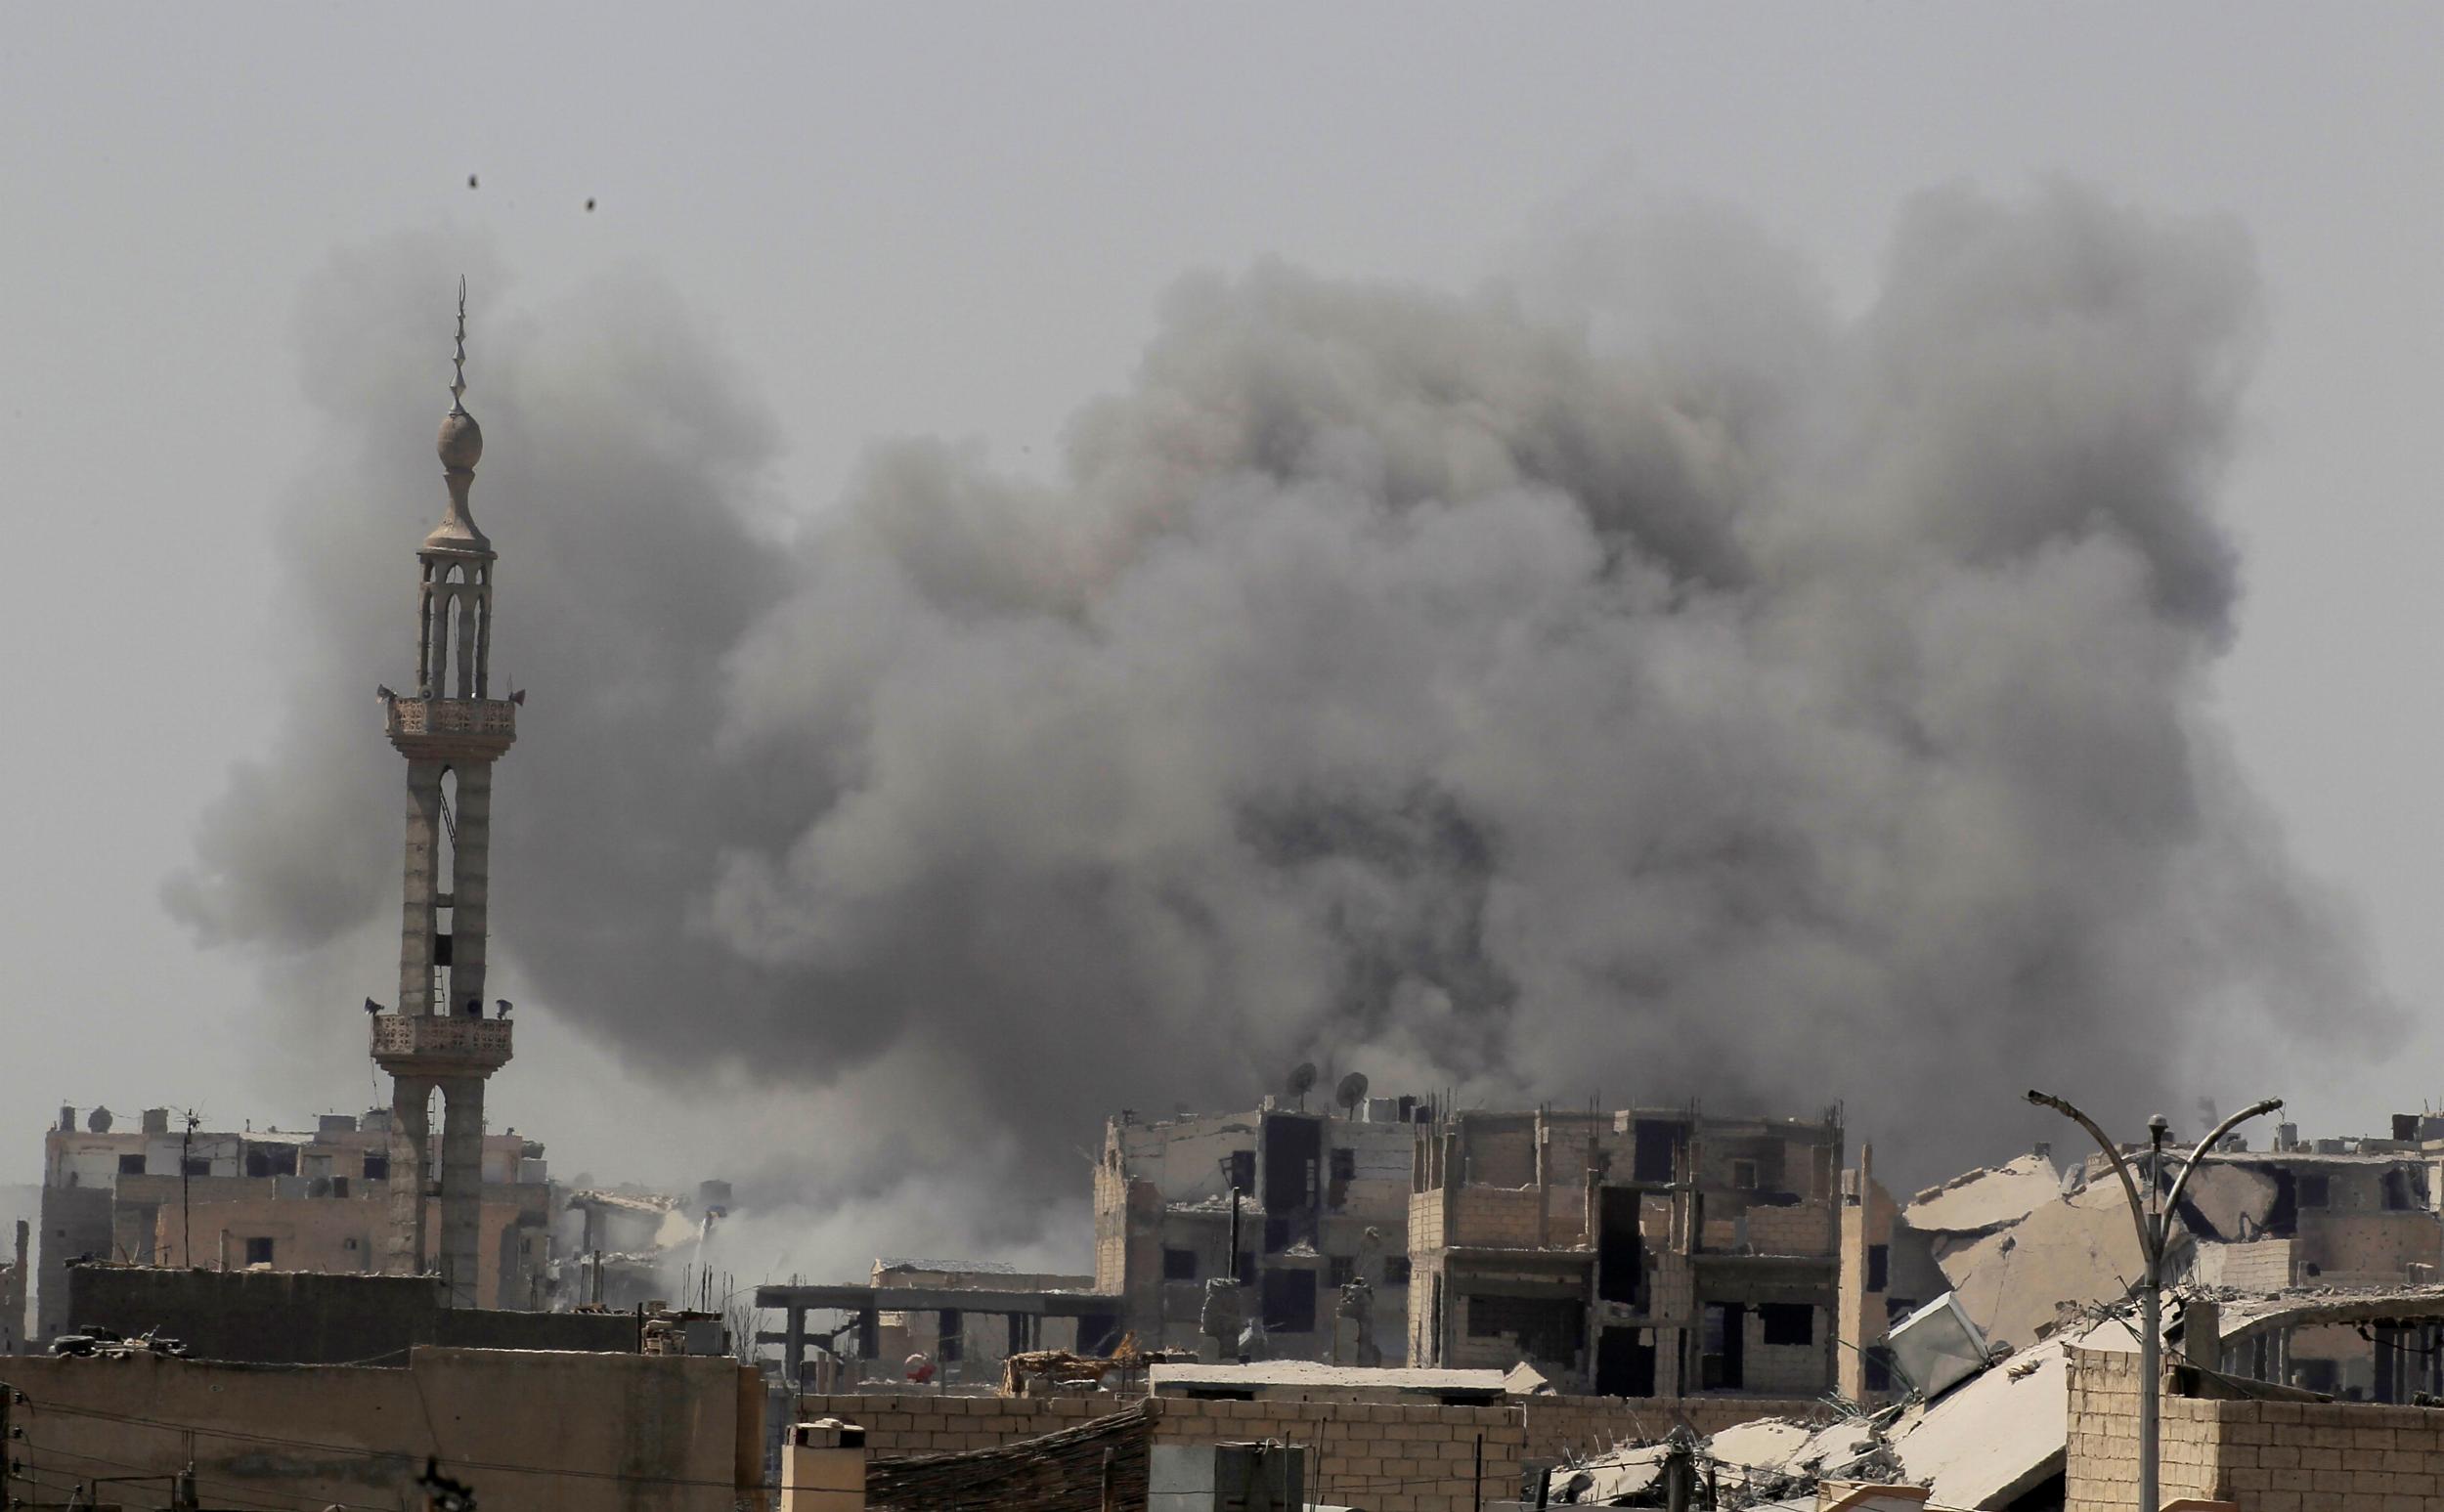 Smoke rises after an air strike during fighting between members of the US-backed Syrian Democratic Forces and Isis in Raqqa on 20 August 2017